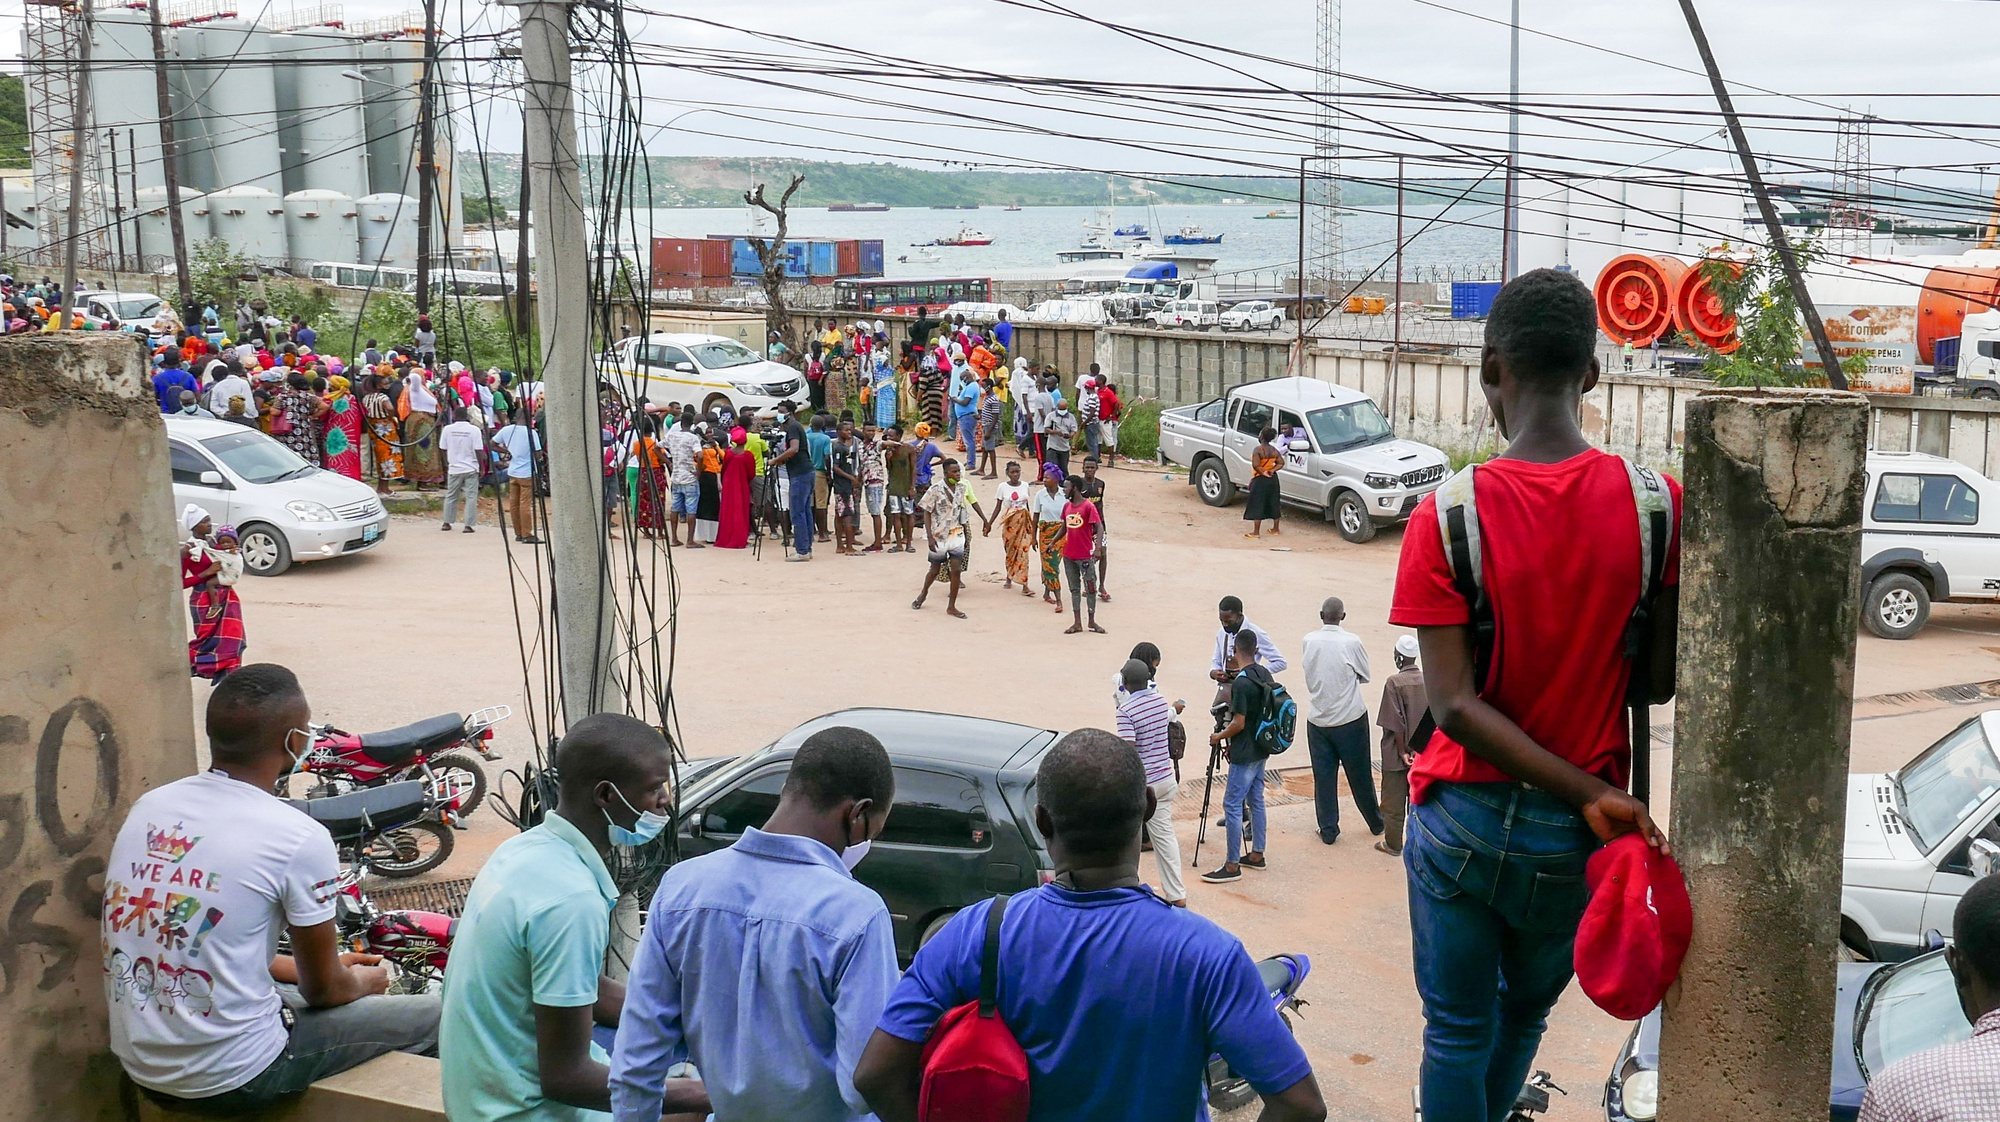 People wait at the port of Pemba for the arrival of a boat with 1200 displaced people coming from Palma, in Pemba, Mozambique, 01 April 2021. It is the largest single arrival in Pemba of displaced civilians, population of Palma. LUIS MIGUEL FONSECA/LUSA